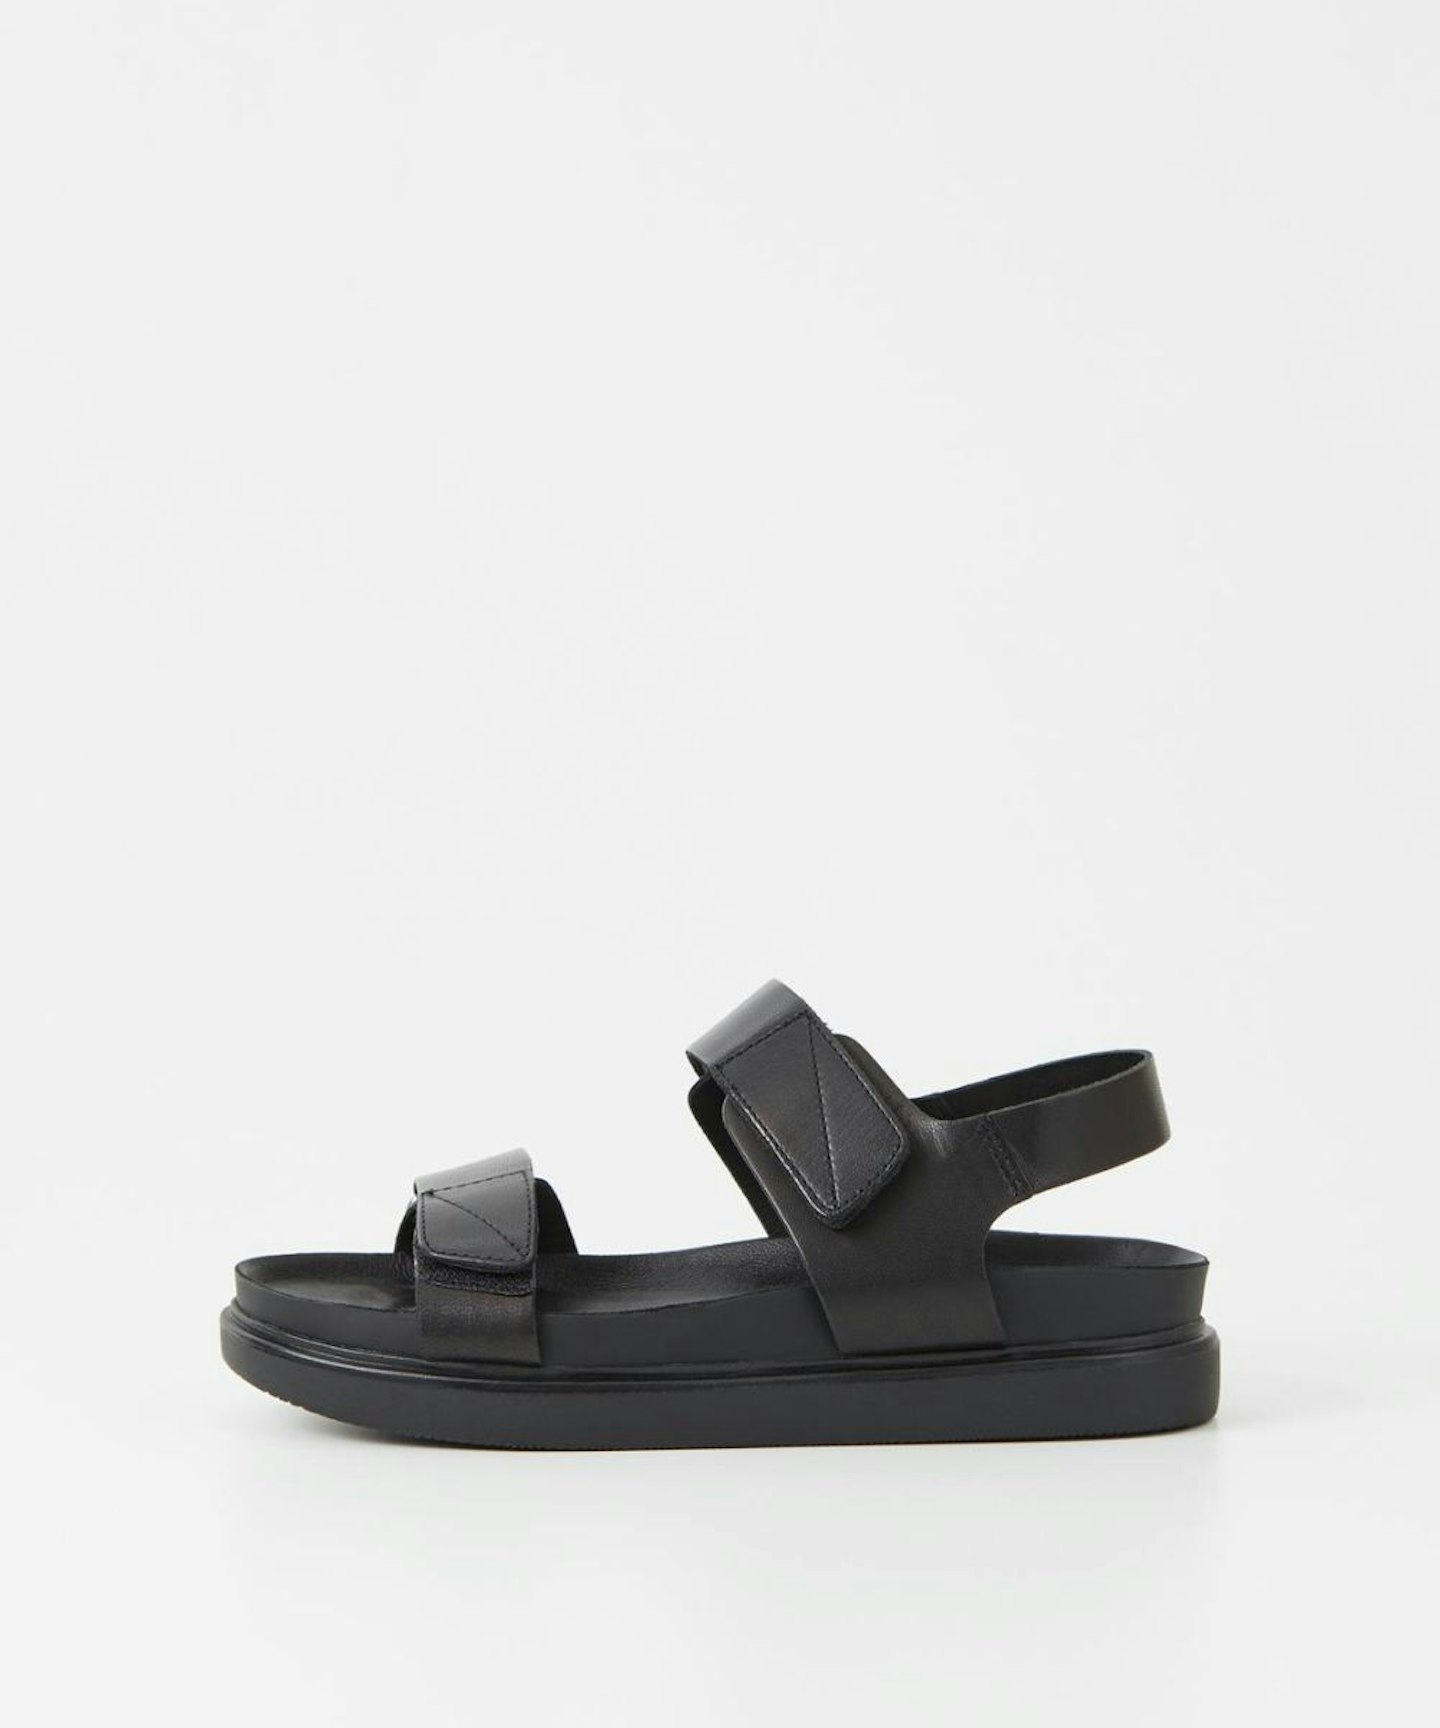 The Best Chanel Dad Sandal Dupes Start From £24.99